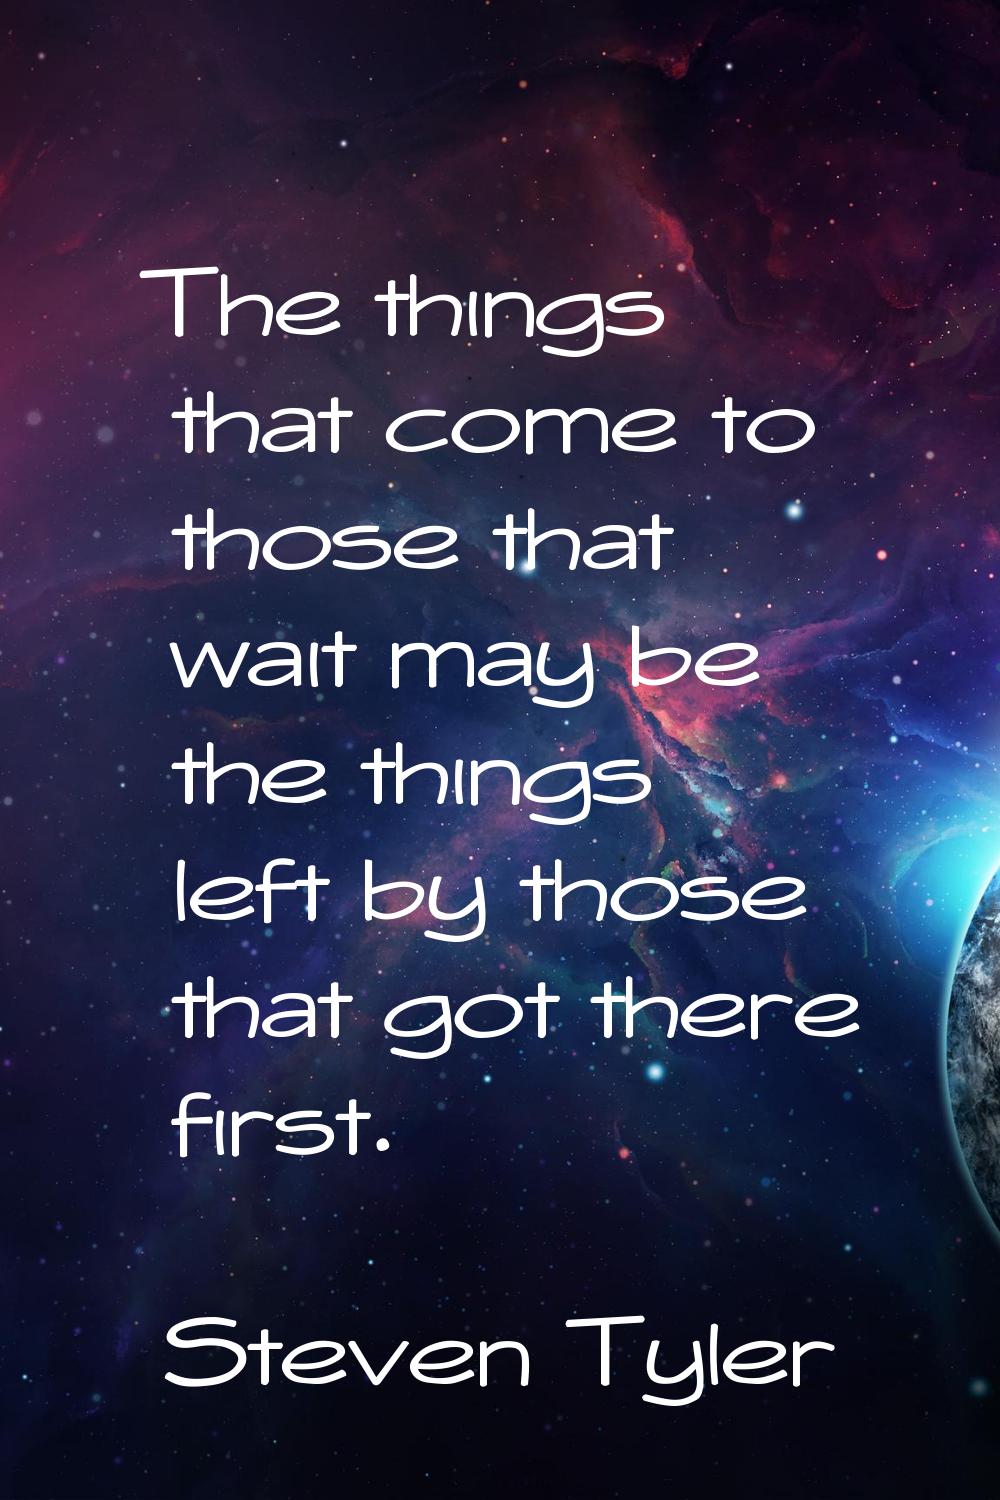 The things that come to those that wait may be the things left by those that got there first.